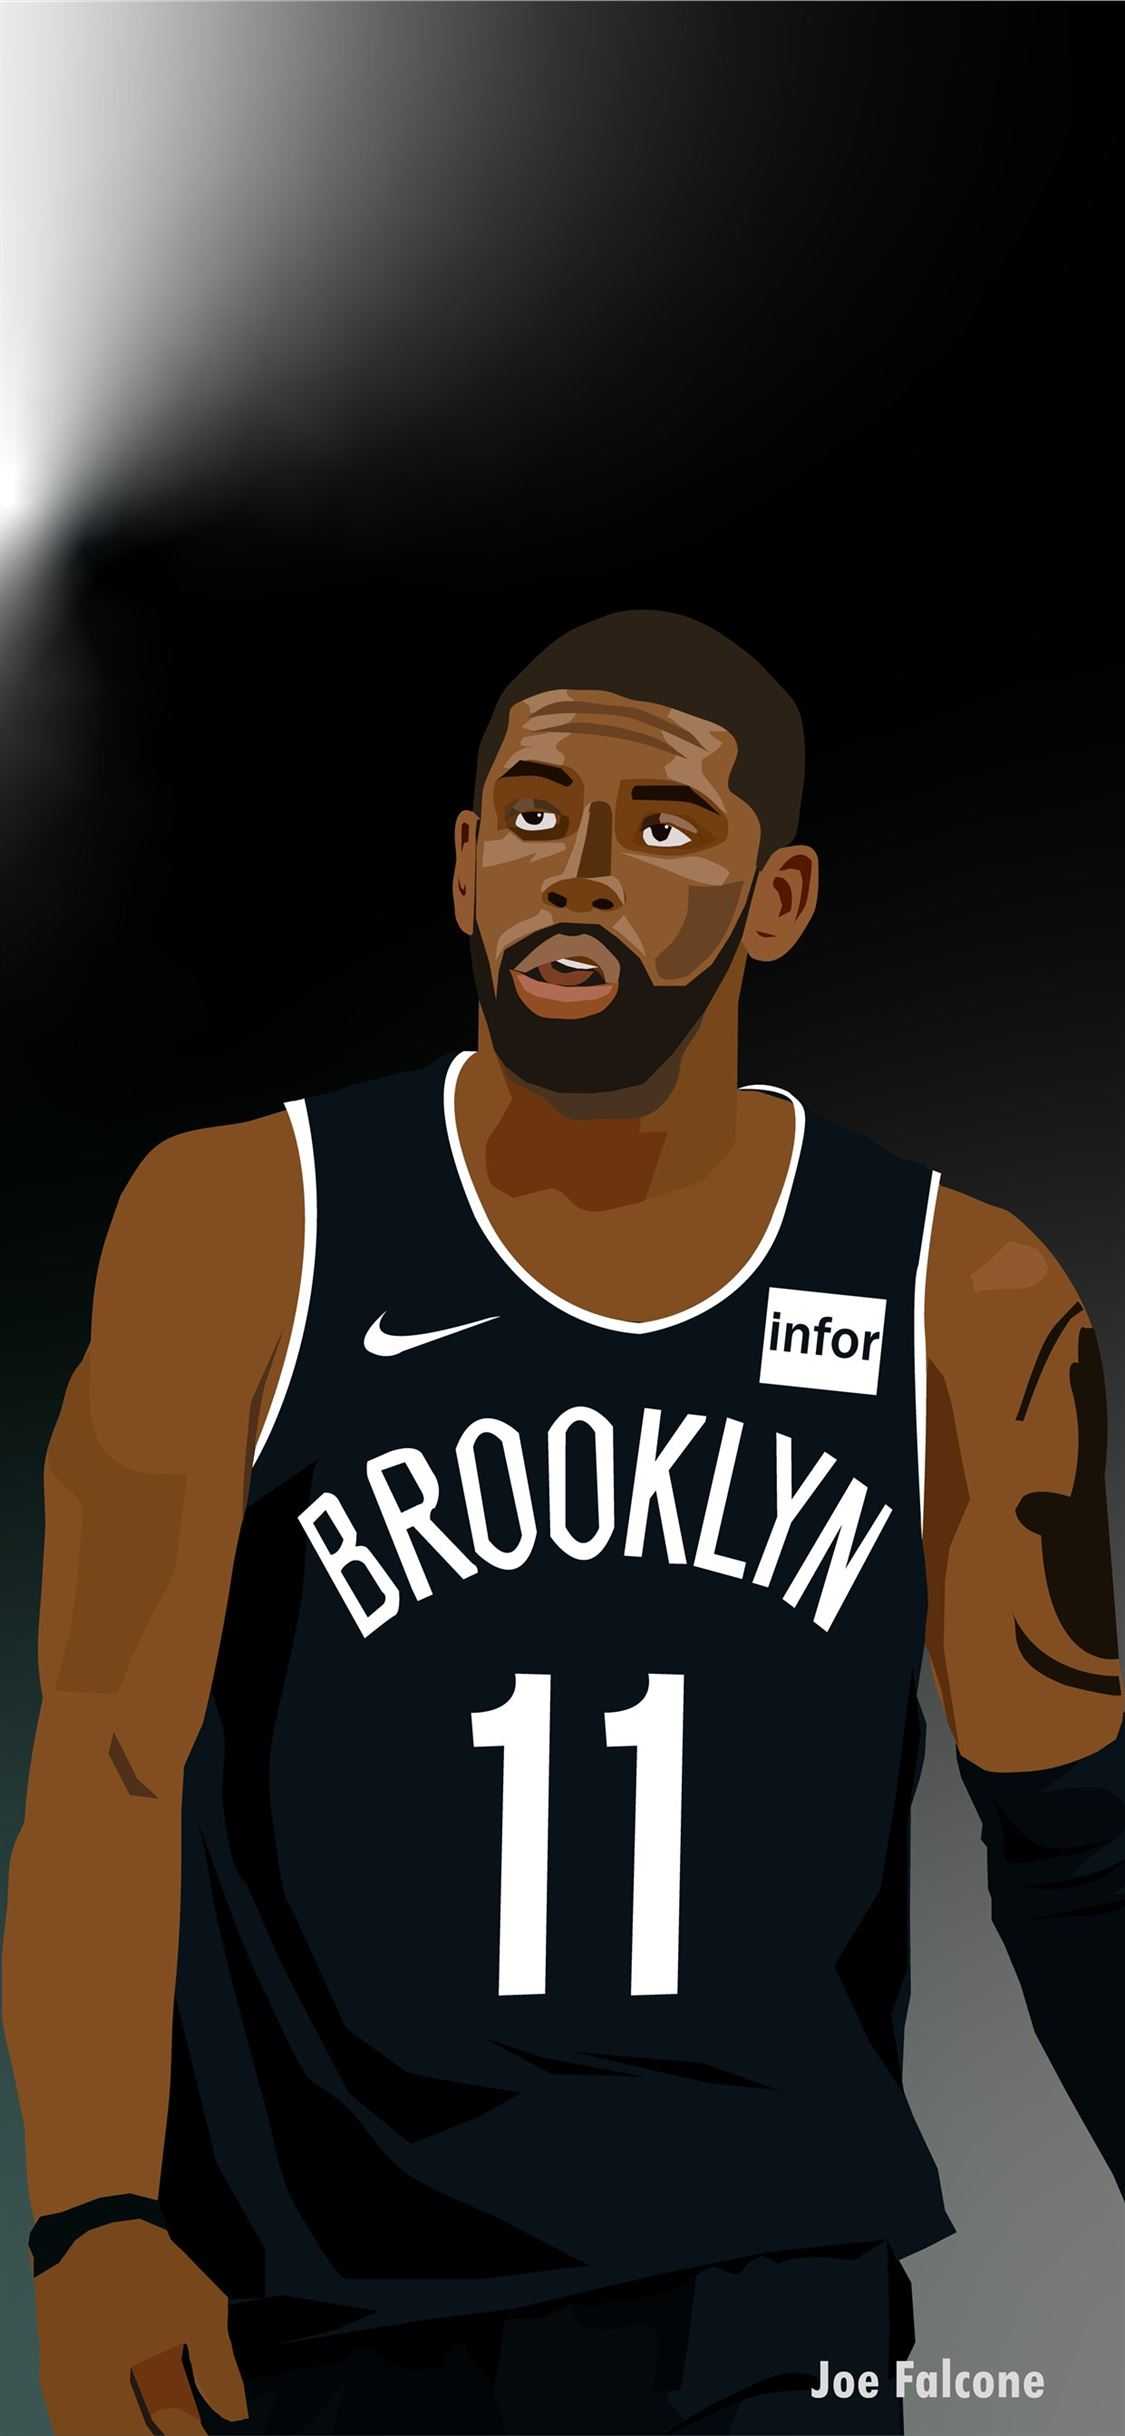 Kyrie Irving Wallpaper - NawPic